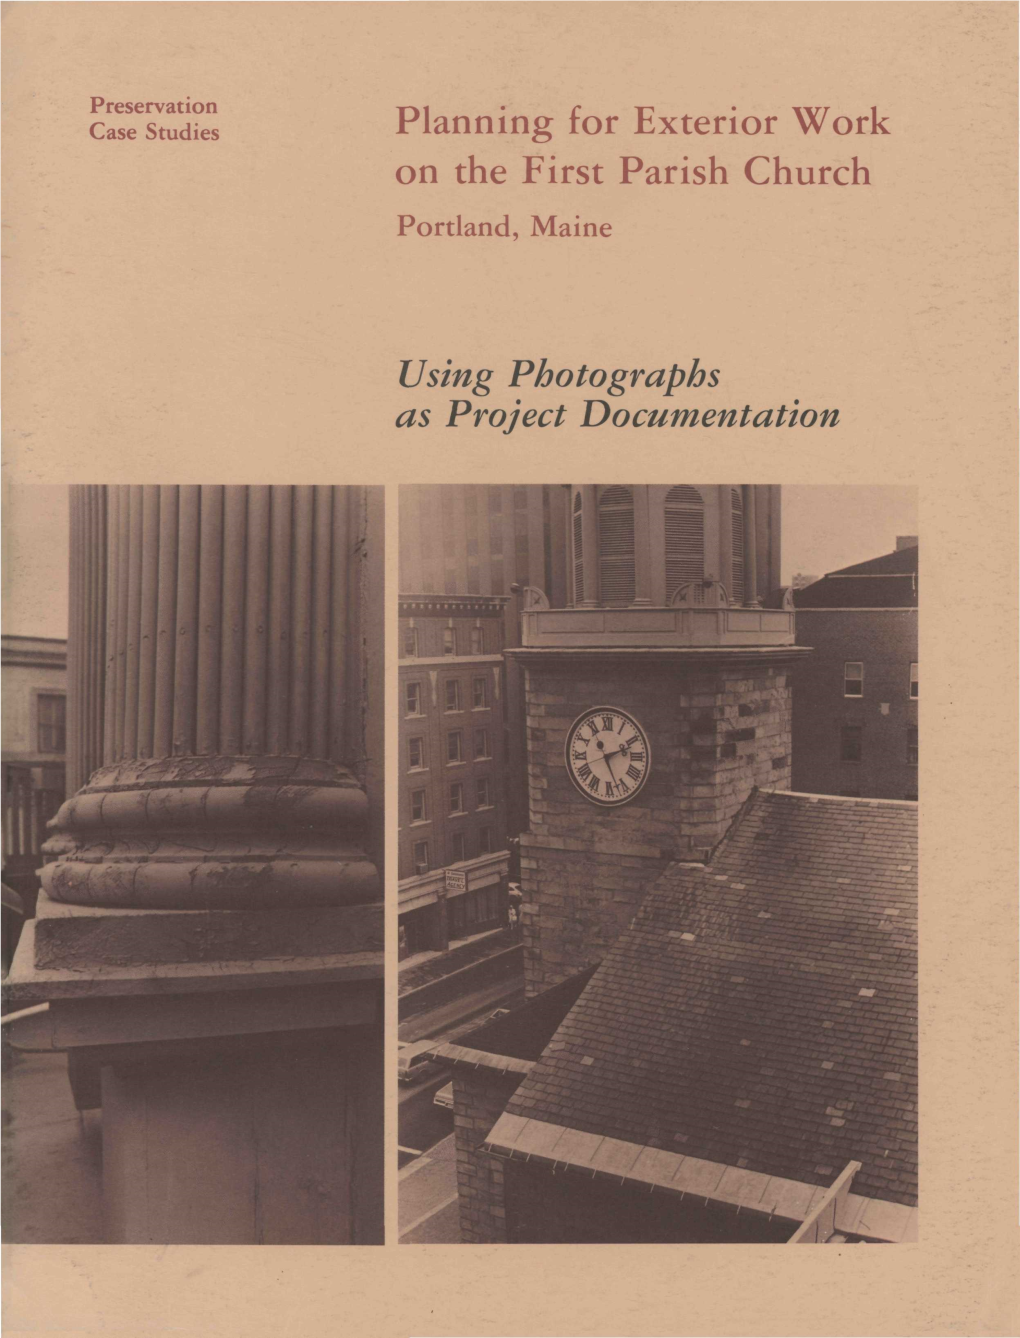 Planning for Exterior Work on the First Parish Church Using Photographs